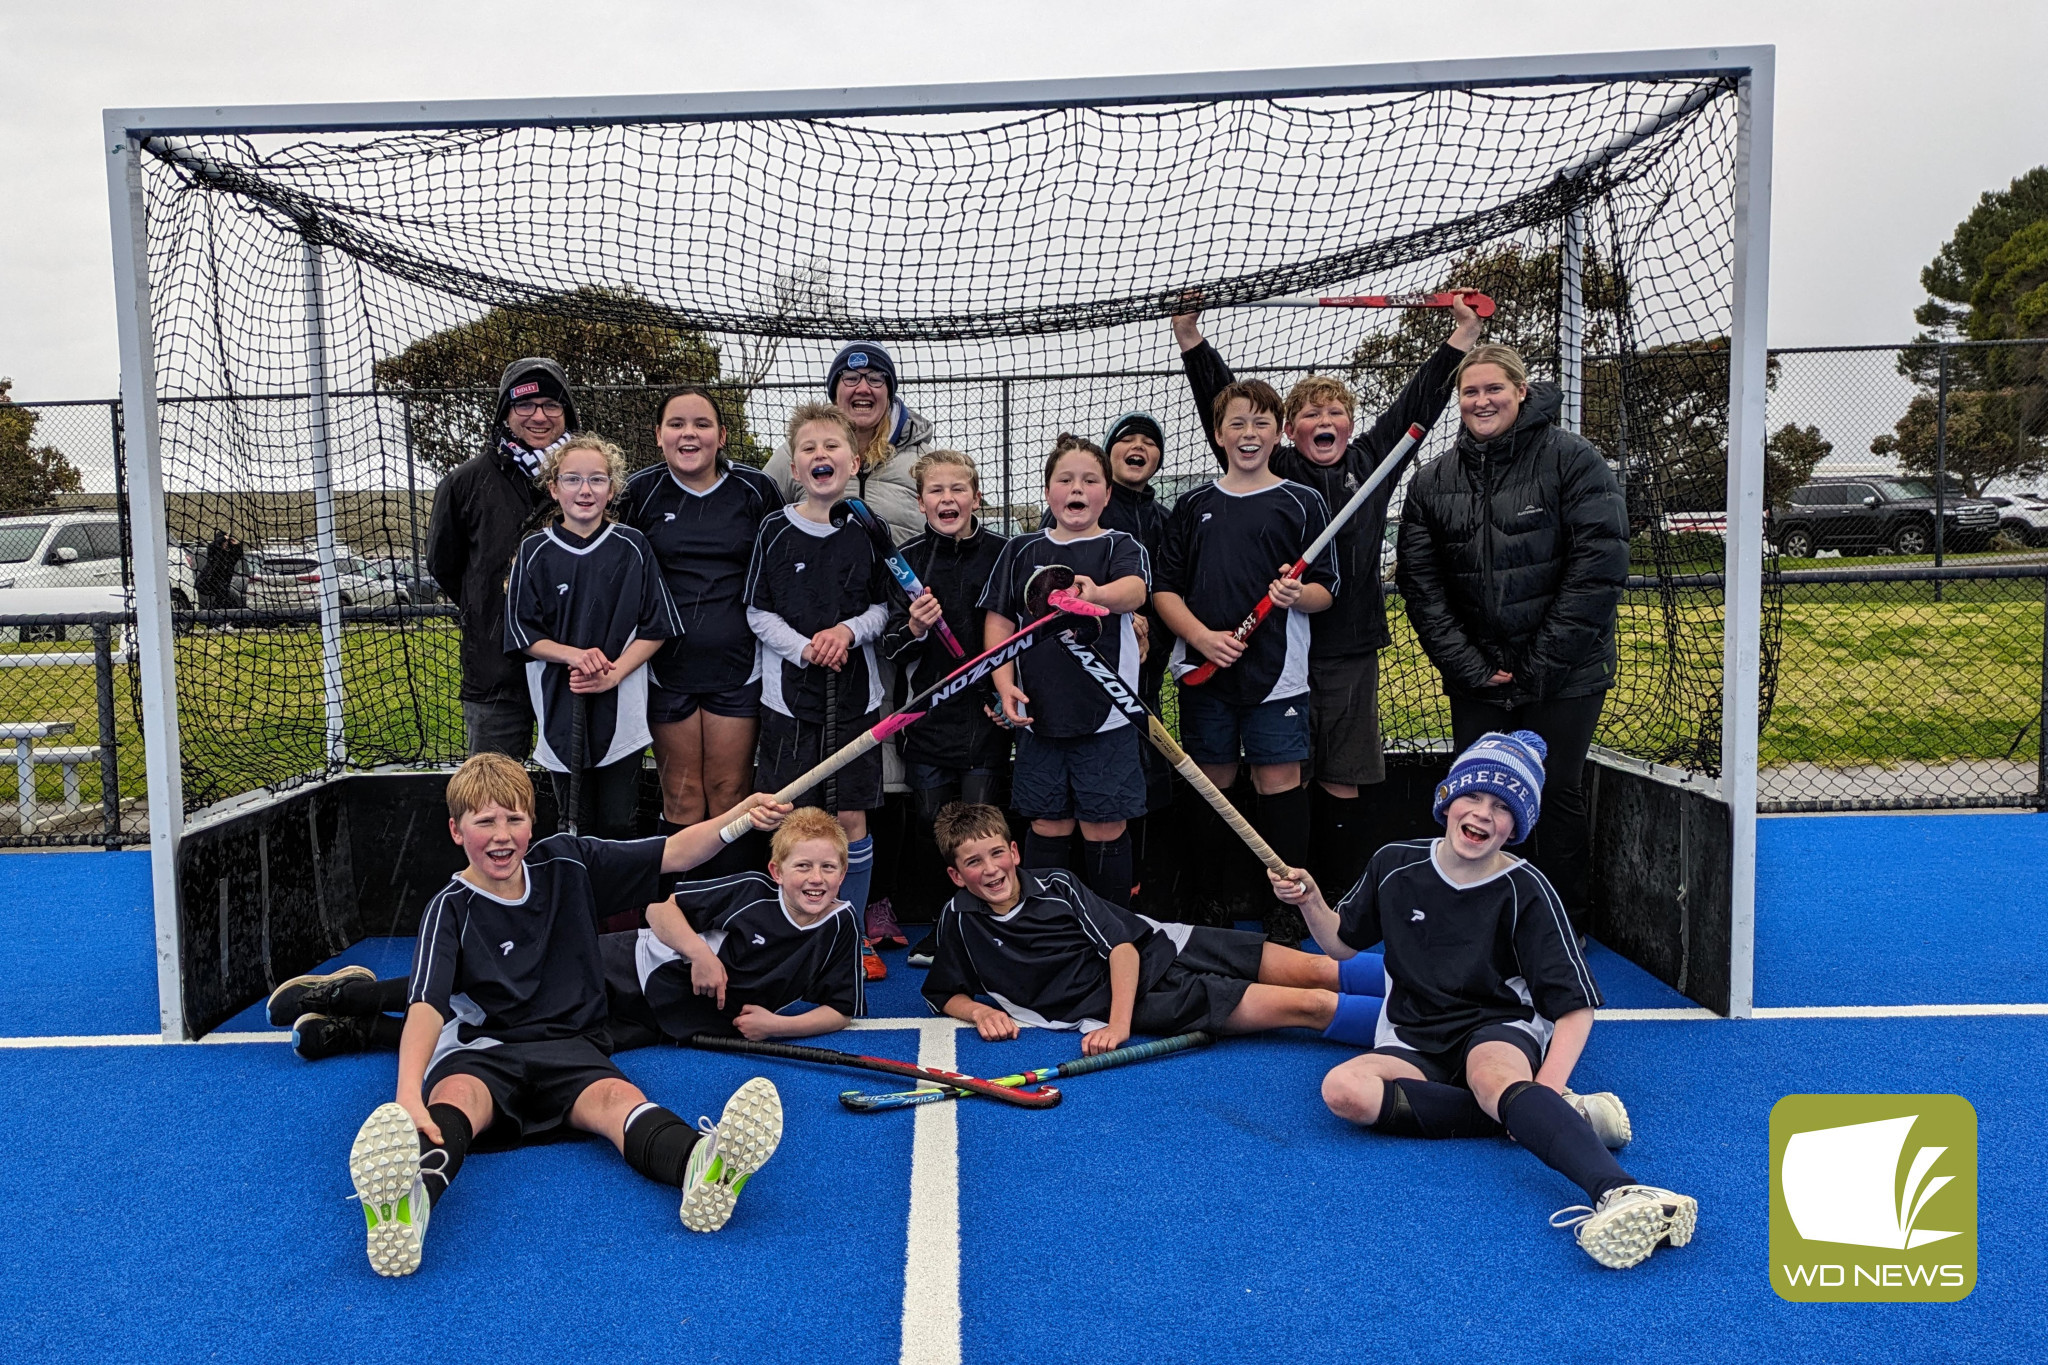 Camperdown College’s year 5/6 hockey team won the grand final at last week’s division hockey tournament.